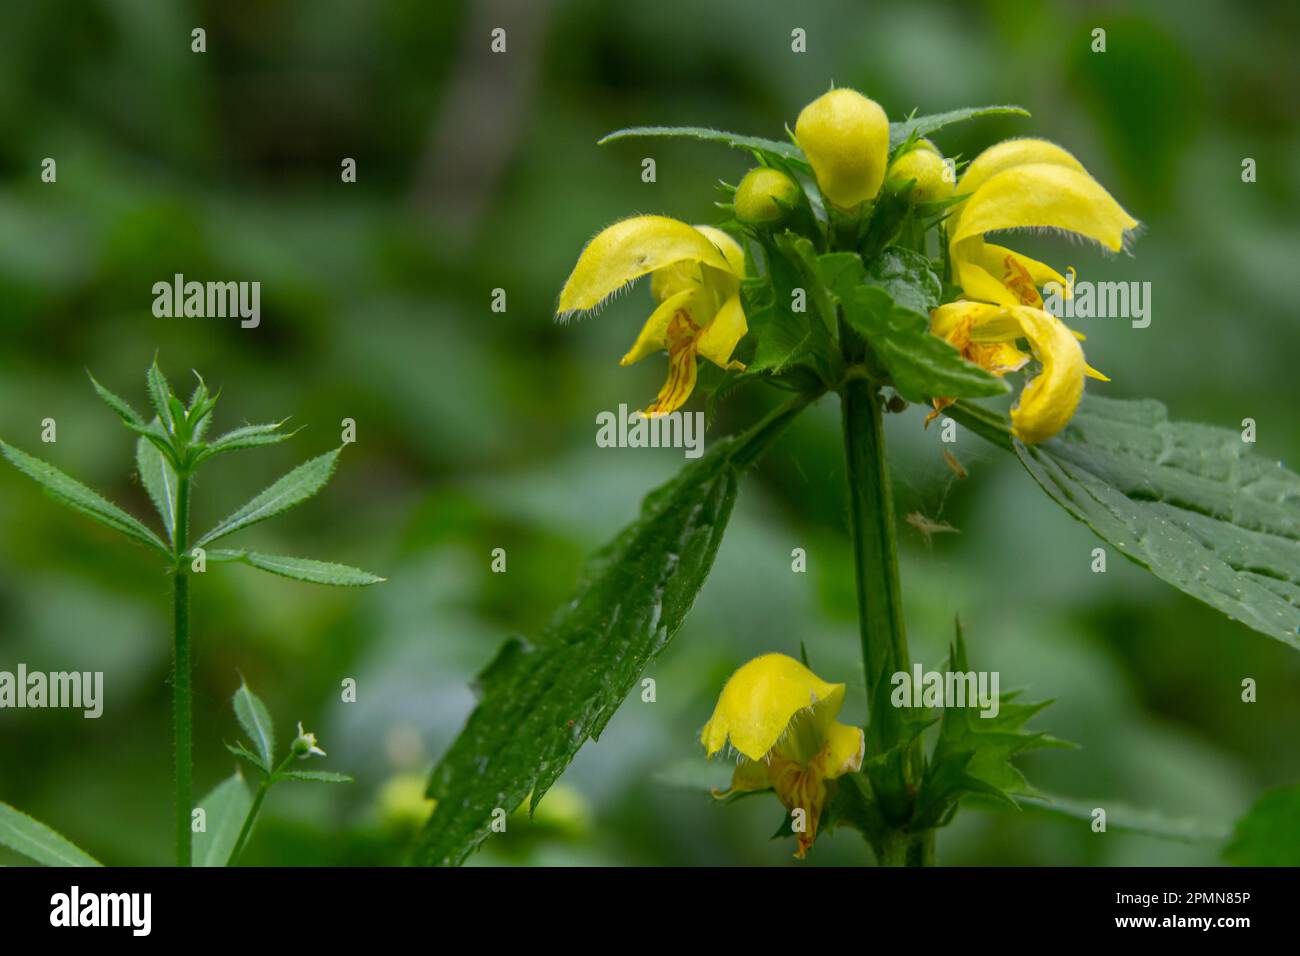 Lamiastrum galeobdolon other name Galeobdolon luteum, perennial yellow flowering herb .blossoms of yellow archangel in spring, green background. Stock Photo